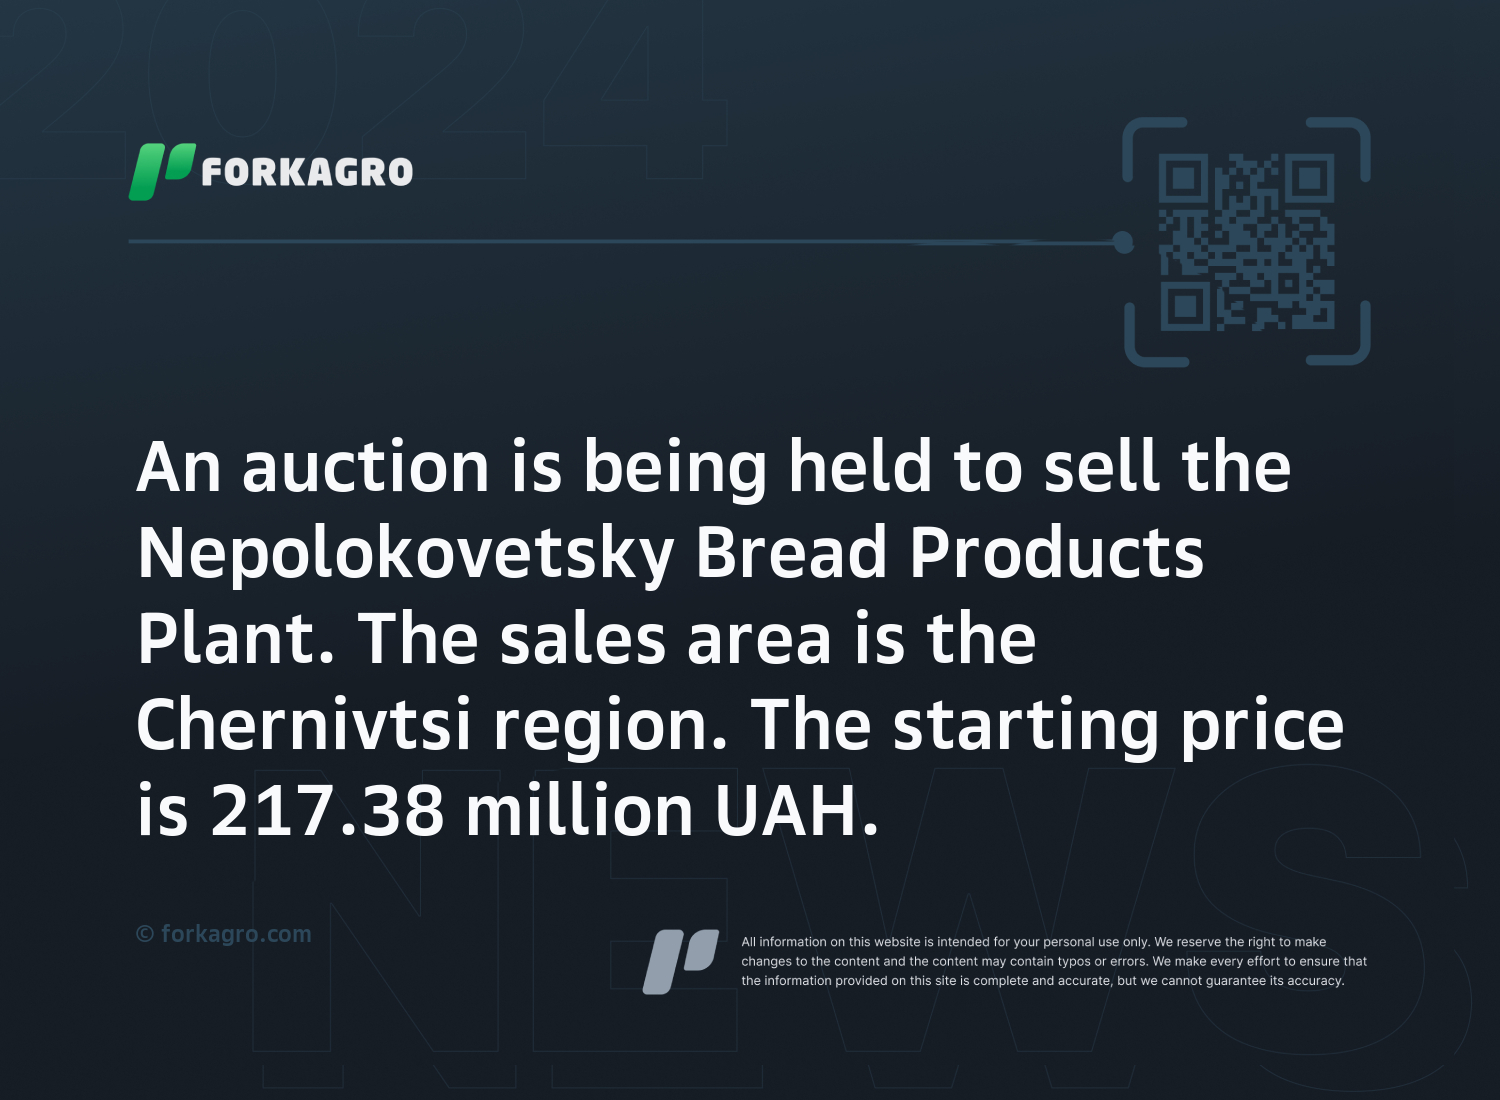 An auction is being held to sell the Nepolokovetsky Bread Products Plant. The sales area is the Chernivtsi region. The starting price is 217.38 million UAH.